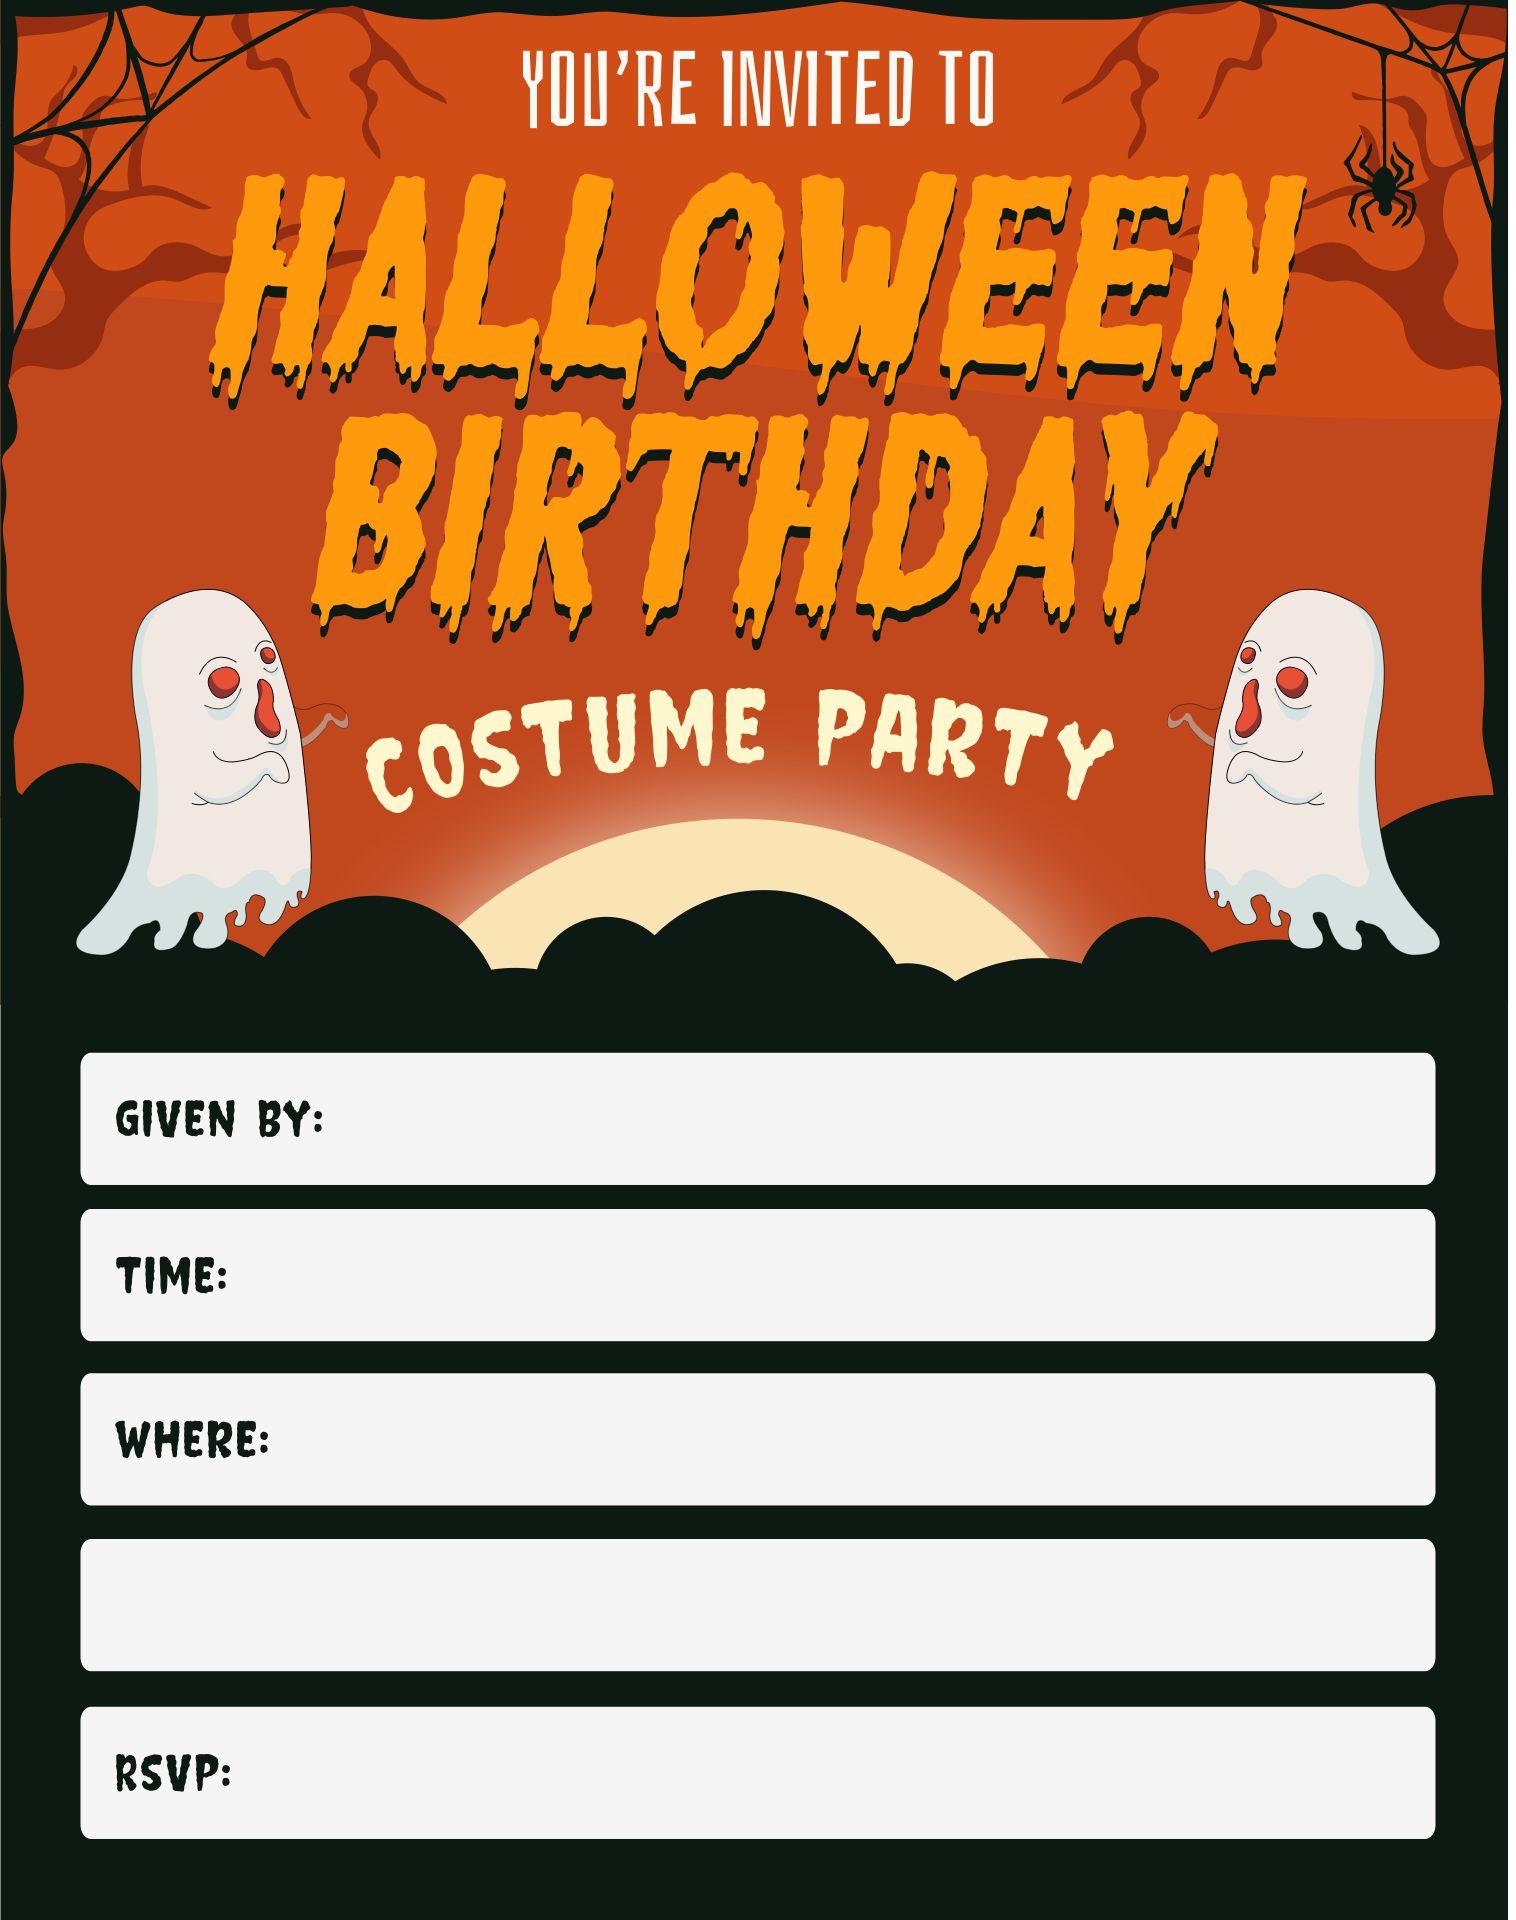 Costume Party Birthday Invitations Template Printable